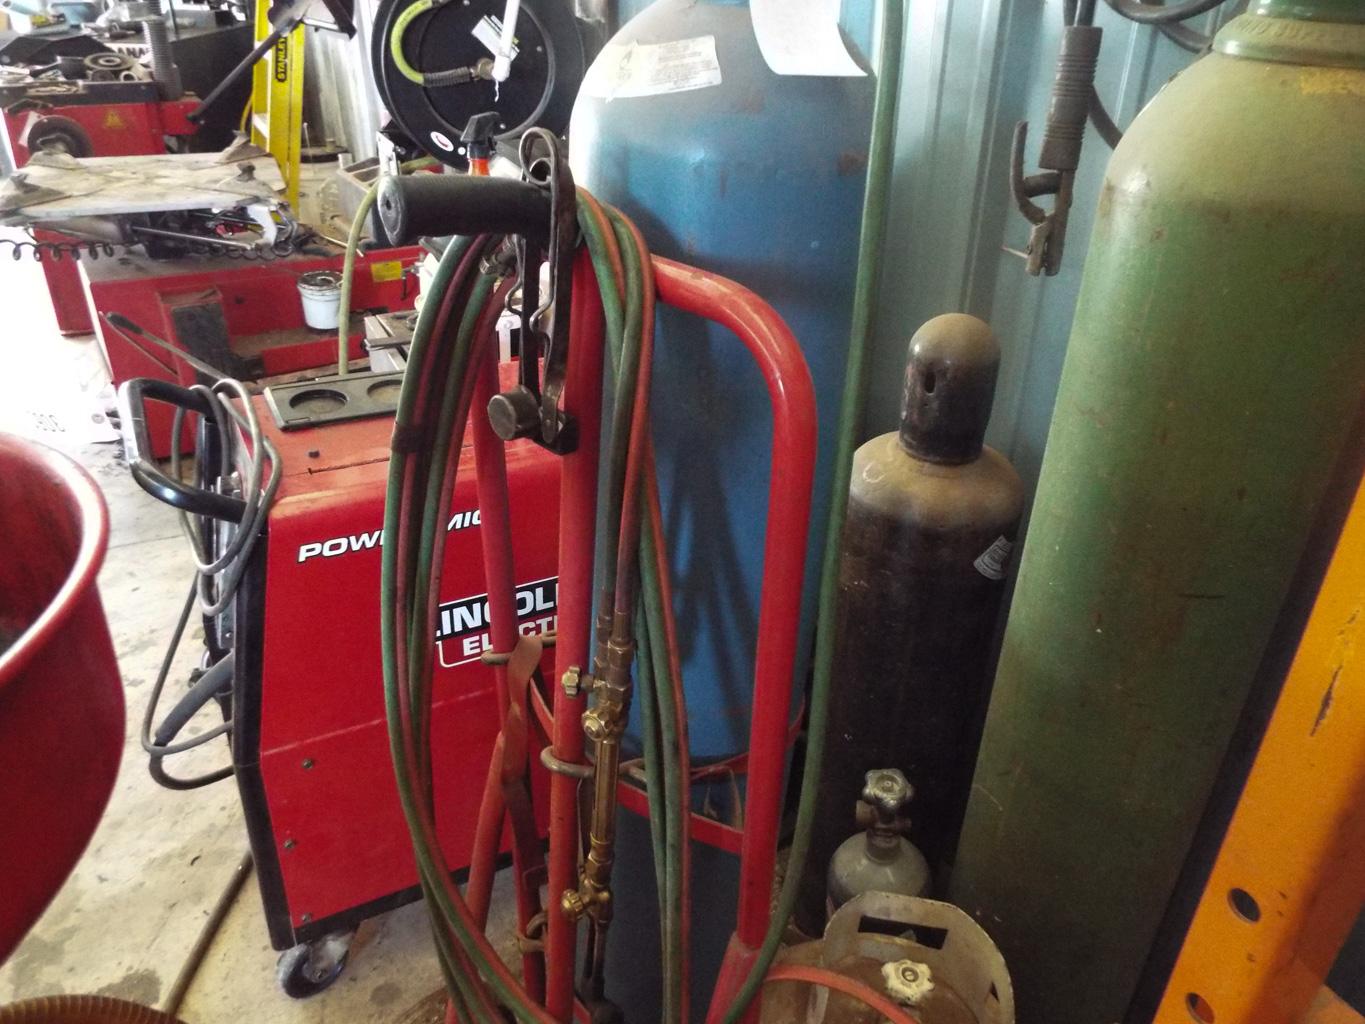 Acetylene torch and cart with extra oxygen bottle